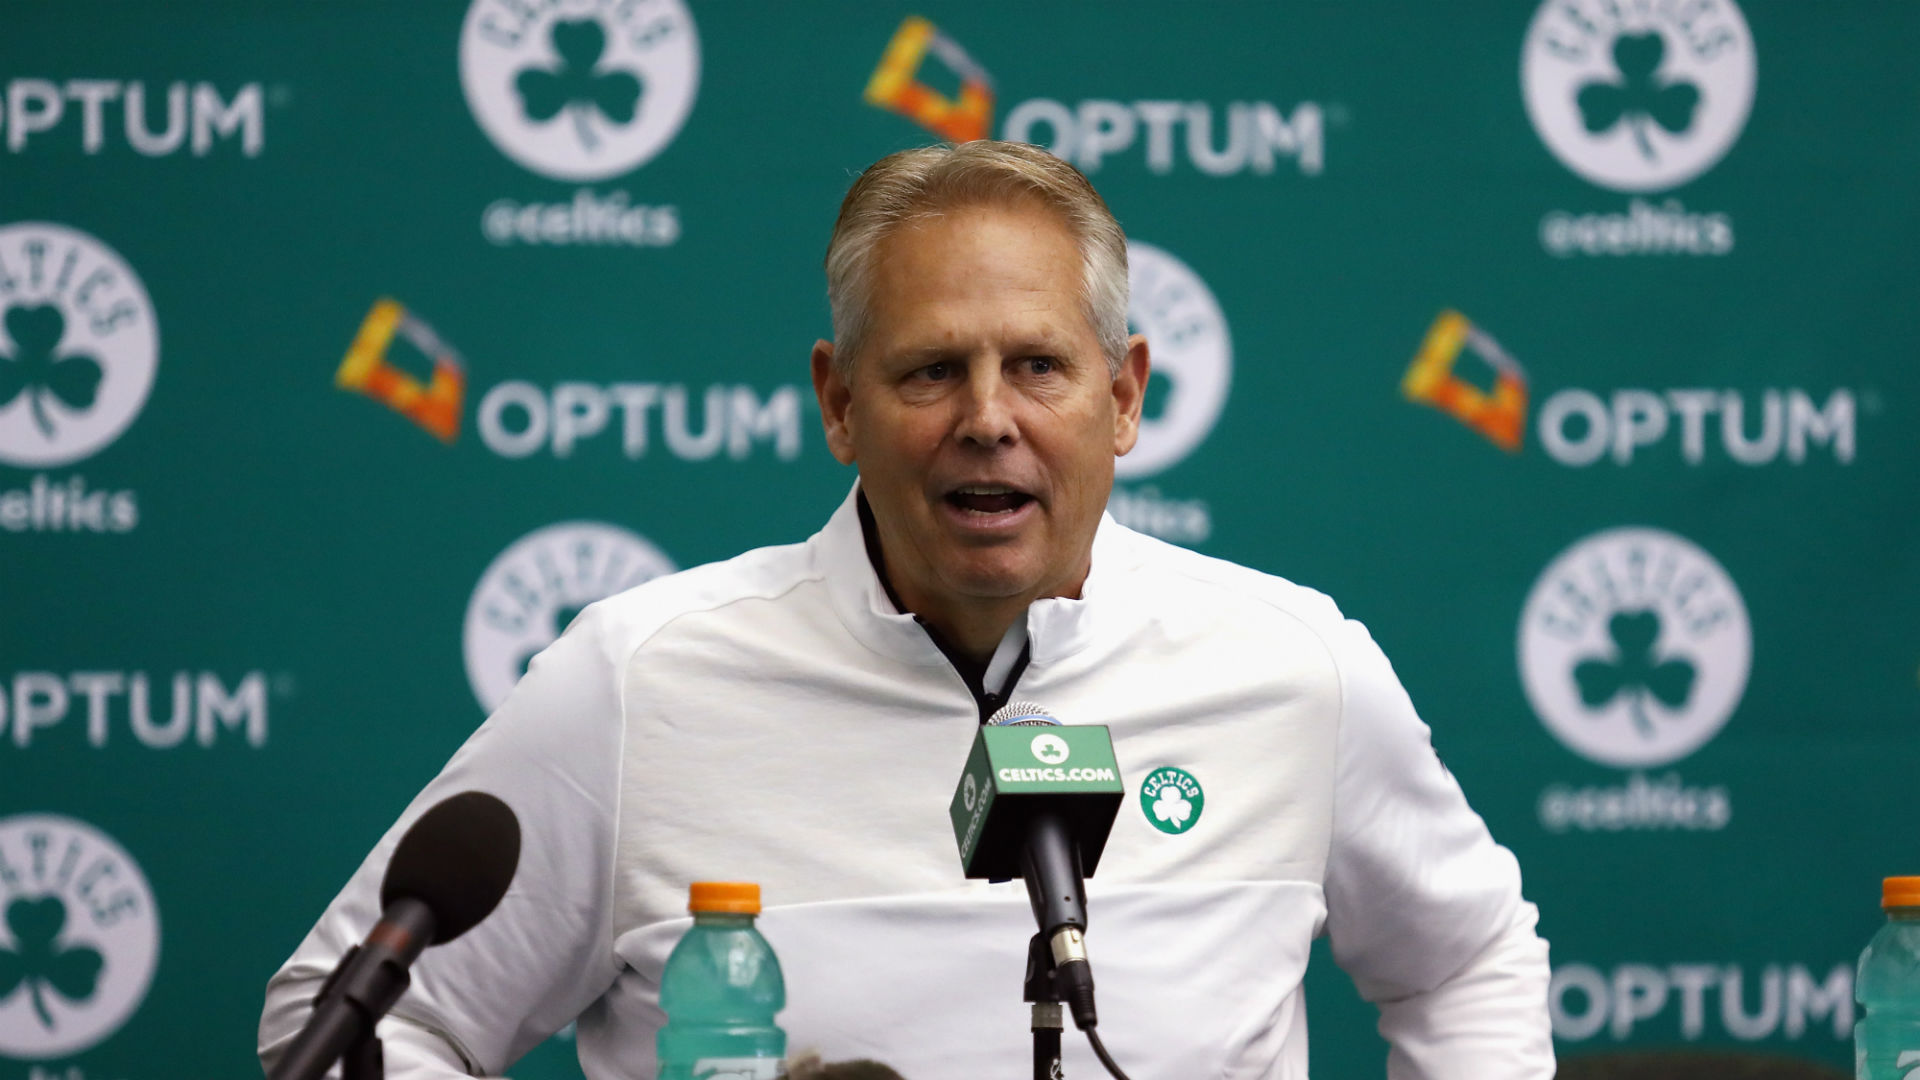 NBA trade rumors: These teams are willing to give up first-round picks, Sporting News sources say Danny-ainge-ftr-jpg_w0aw9h3ztjjf1cw8256366vi8